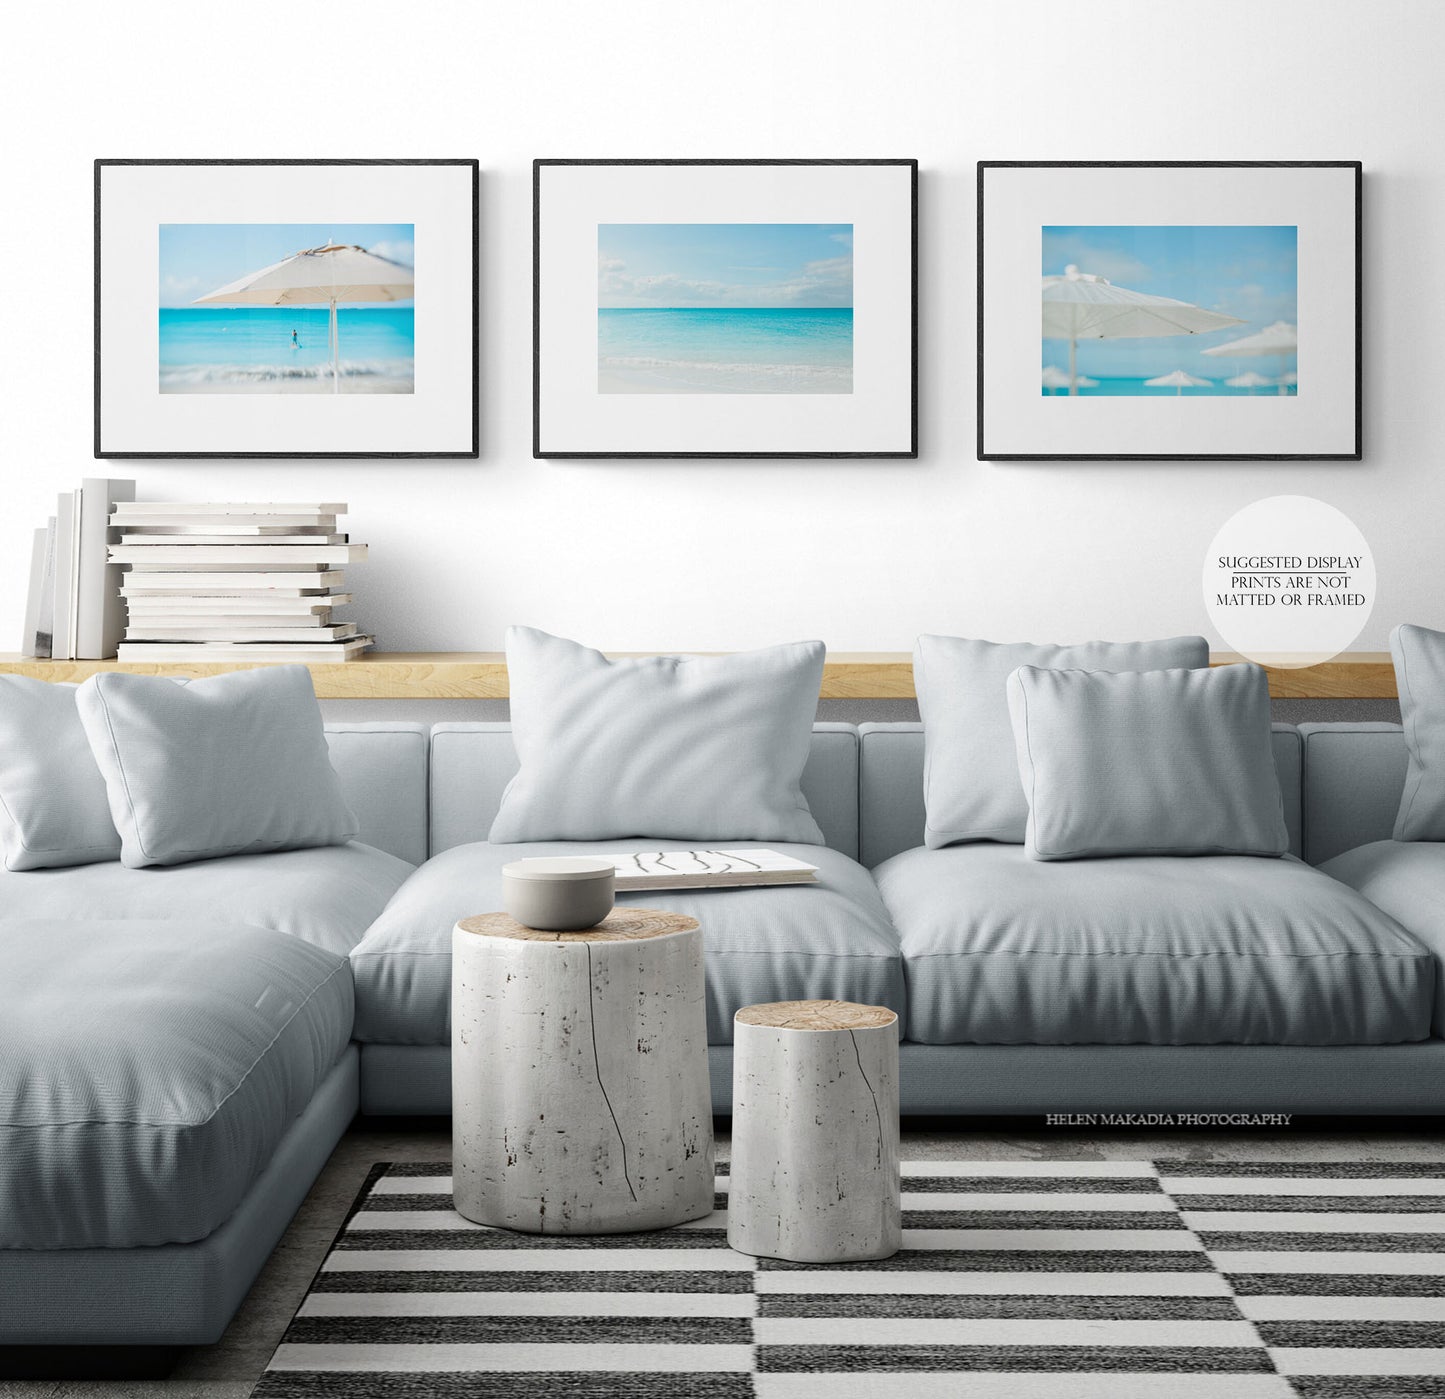 Framed Turks & Caicos Wall Art Collection in a Living Room 